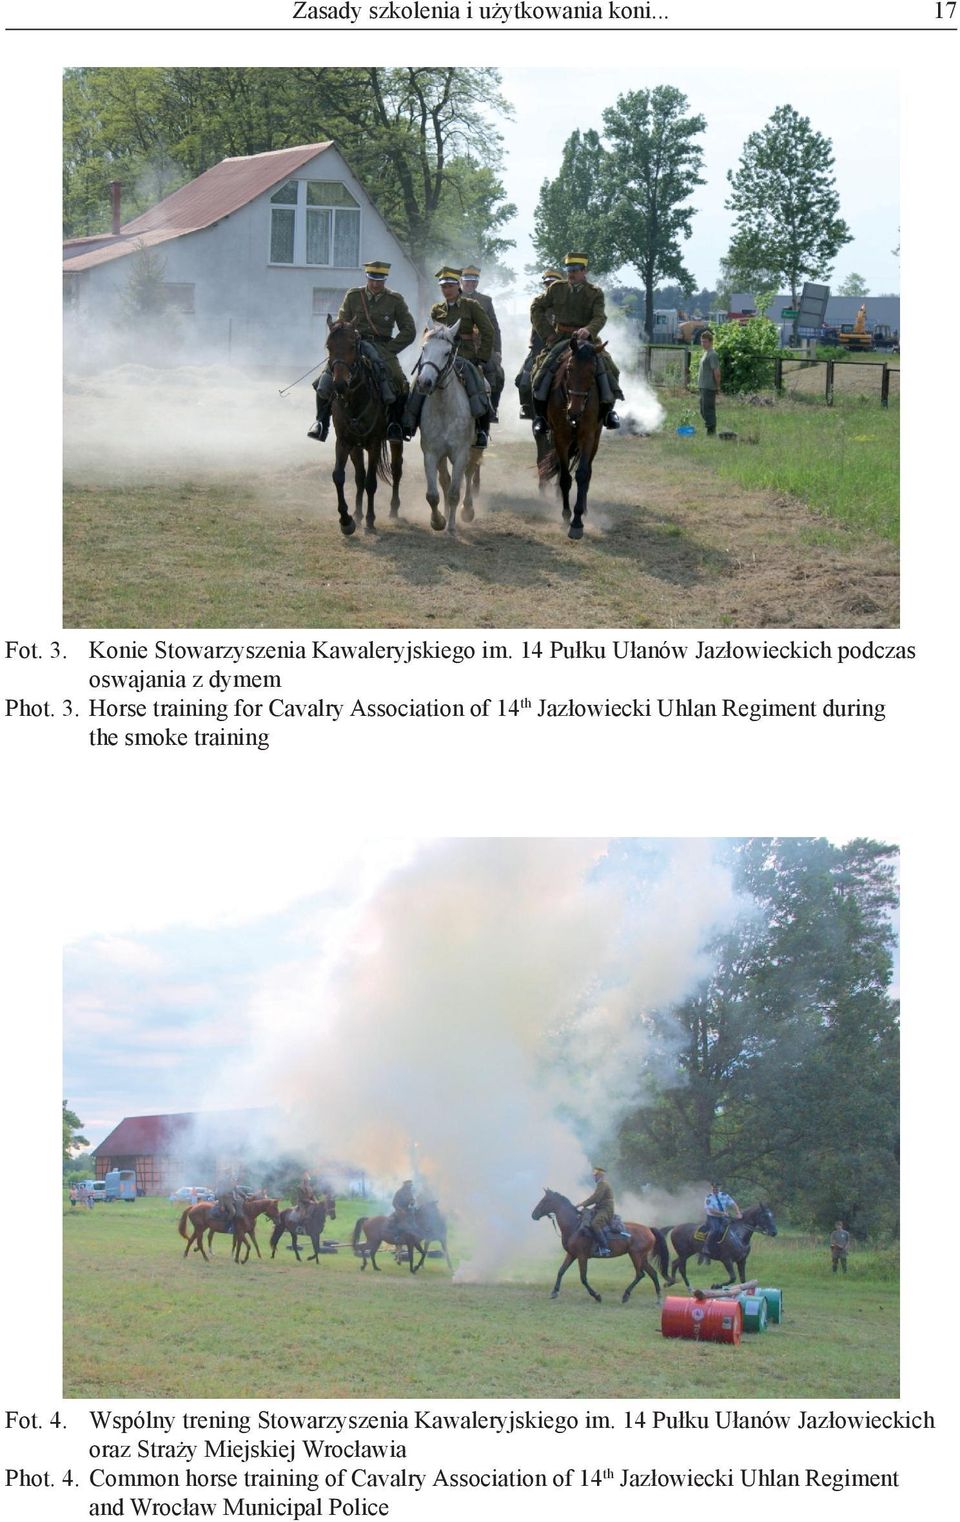 Horse training for Cavalry Association of 14th Jazłowiecki Uhlan Regiment during the smoke training Fot. 4.